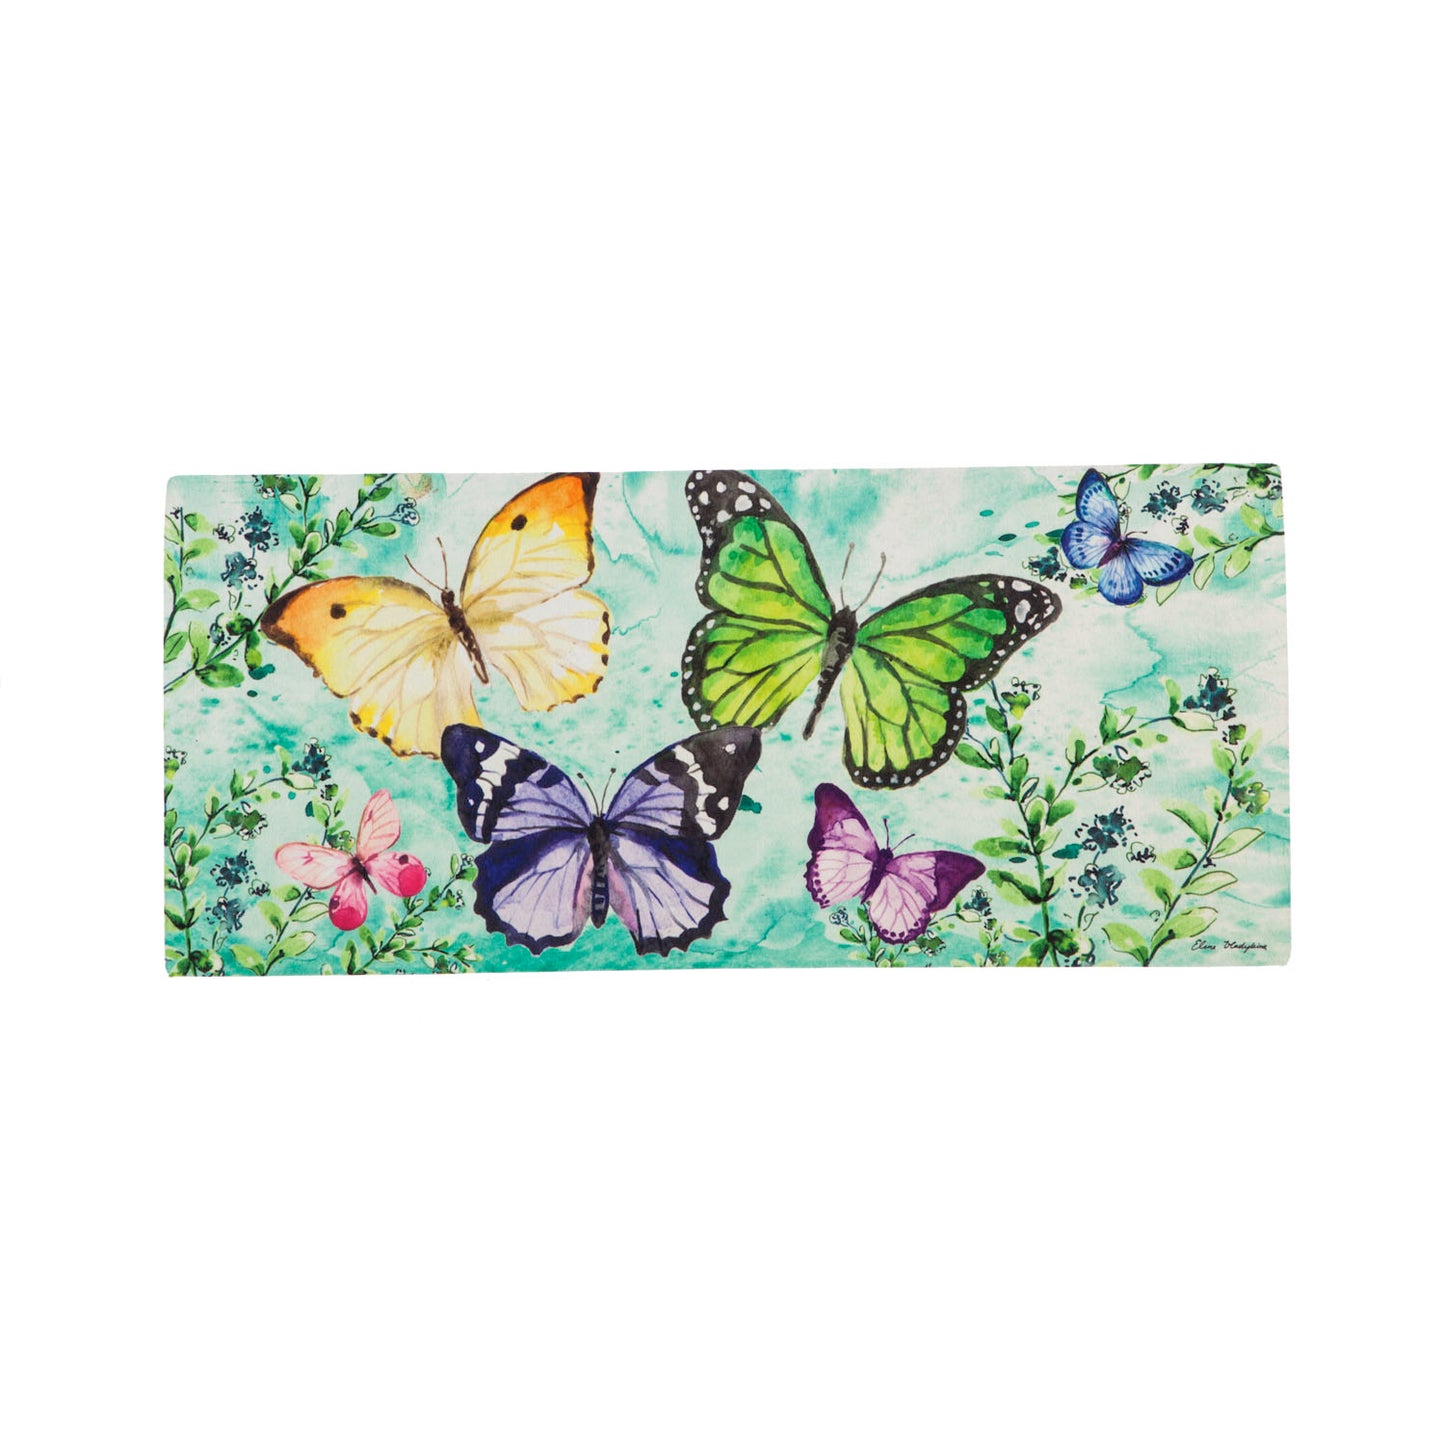 Sassafras Switch Mats Butterfly Friends Whimsical Elegance for Your Entryway